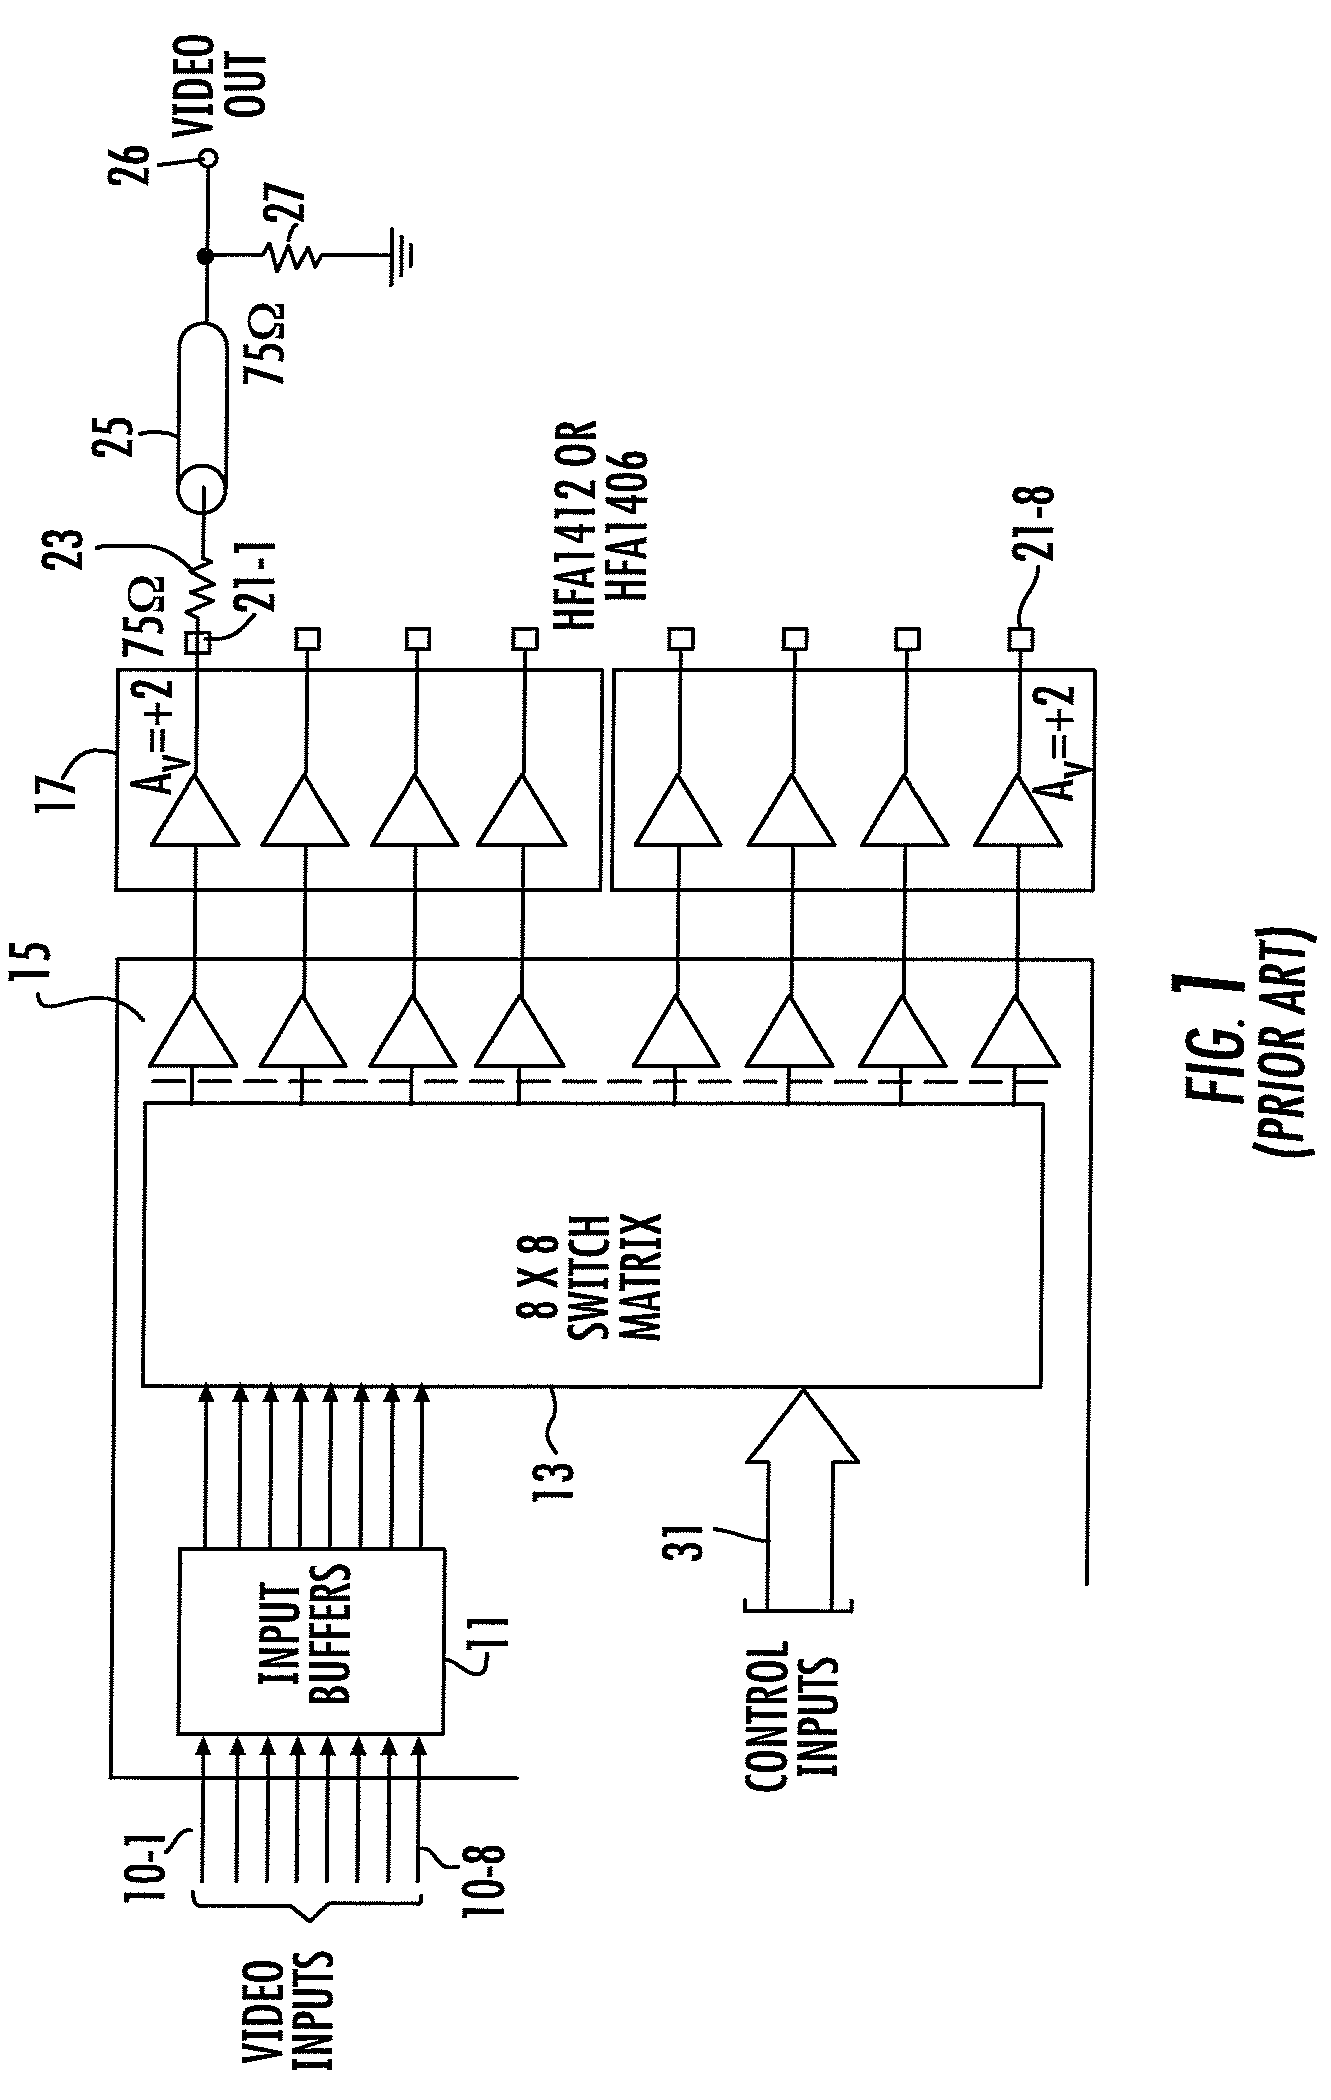 Bidirectional buffered interface for crosspoint switch